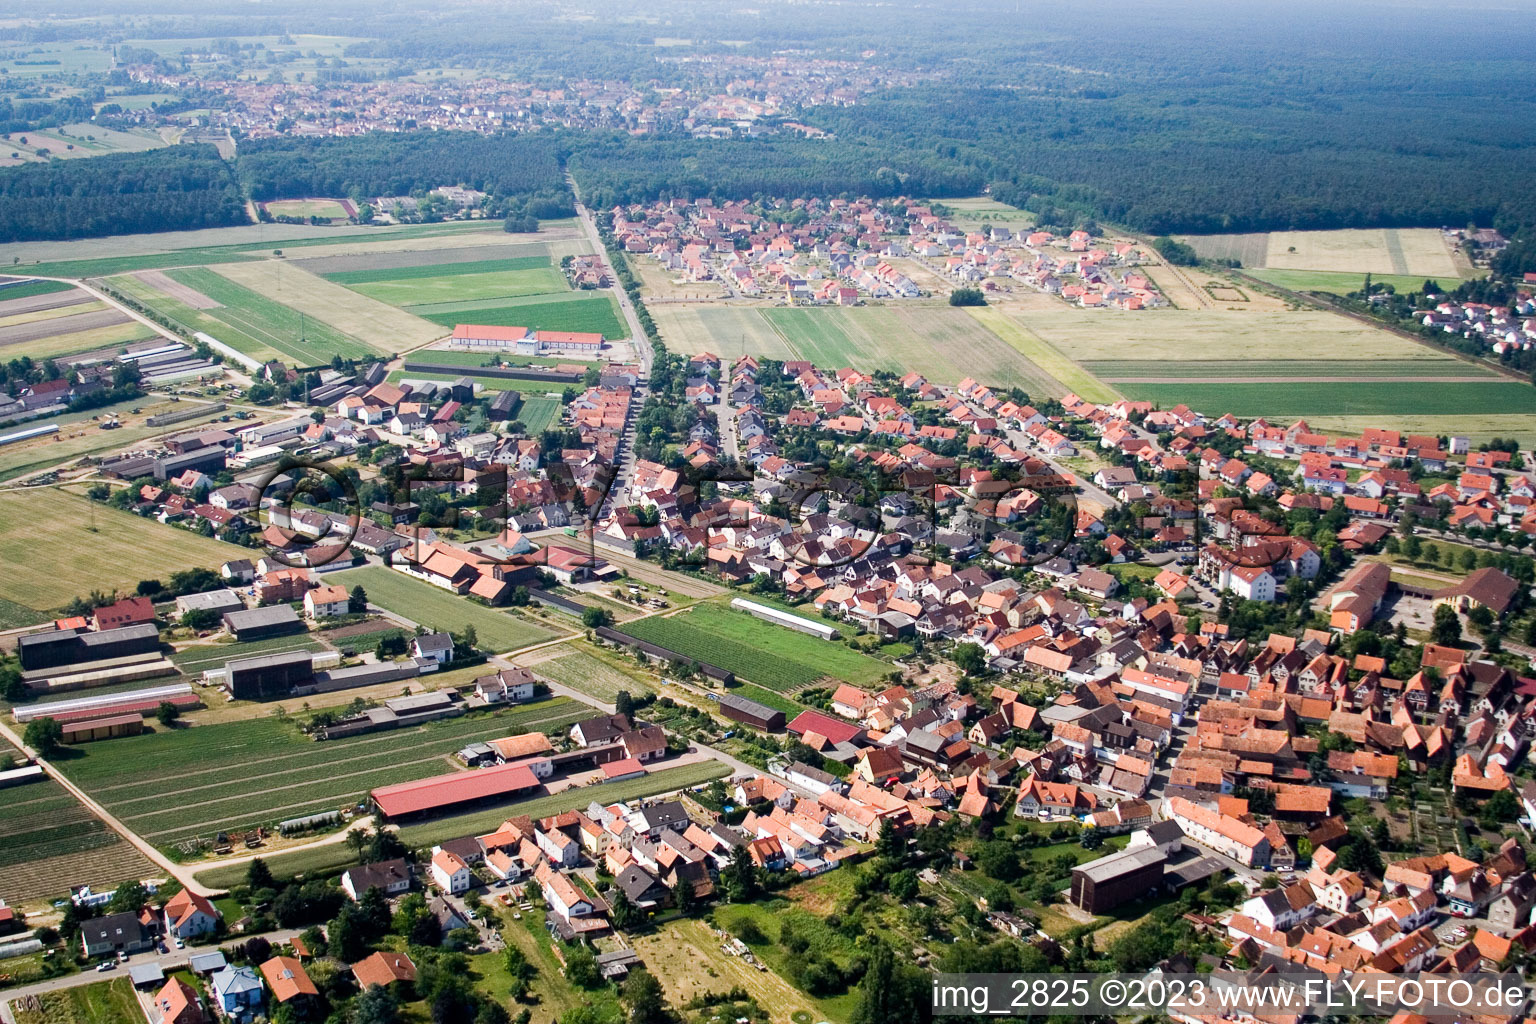 Aerial view of From the northeast in Rheinzabern in the state Rhineland-Palatinate, Germany